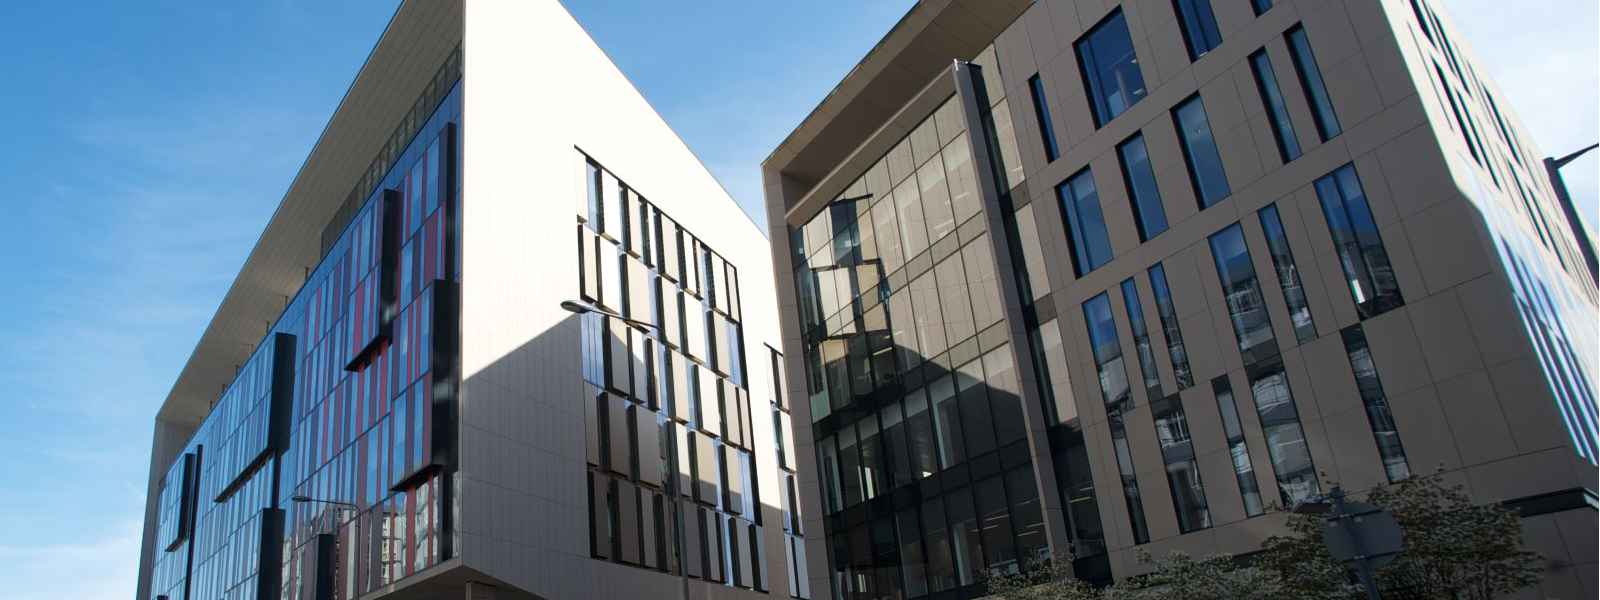 View of the TIC and Inovo buildings on the Strathclyde campus